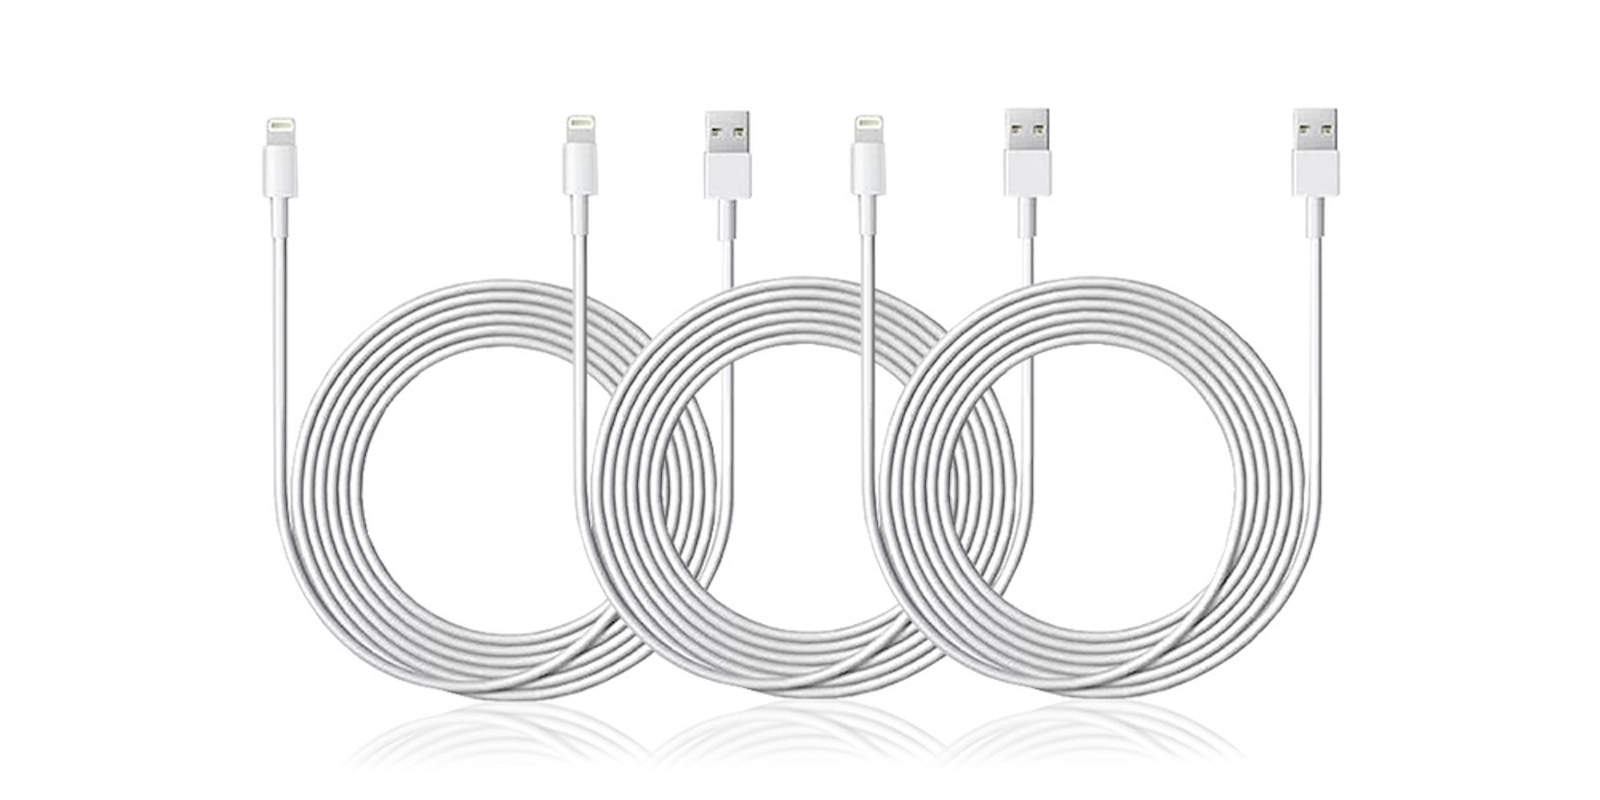 Get three extra long, MFi-certified Lightning cables for less than the price of one.